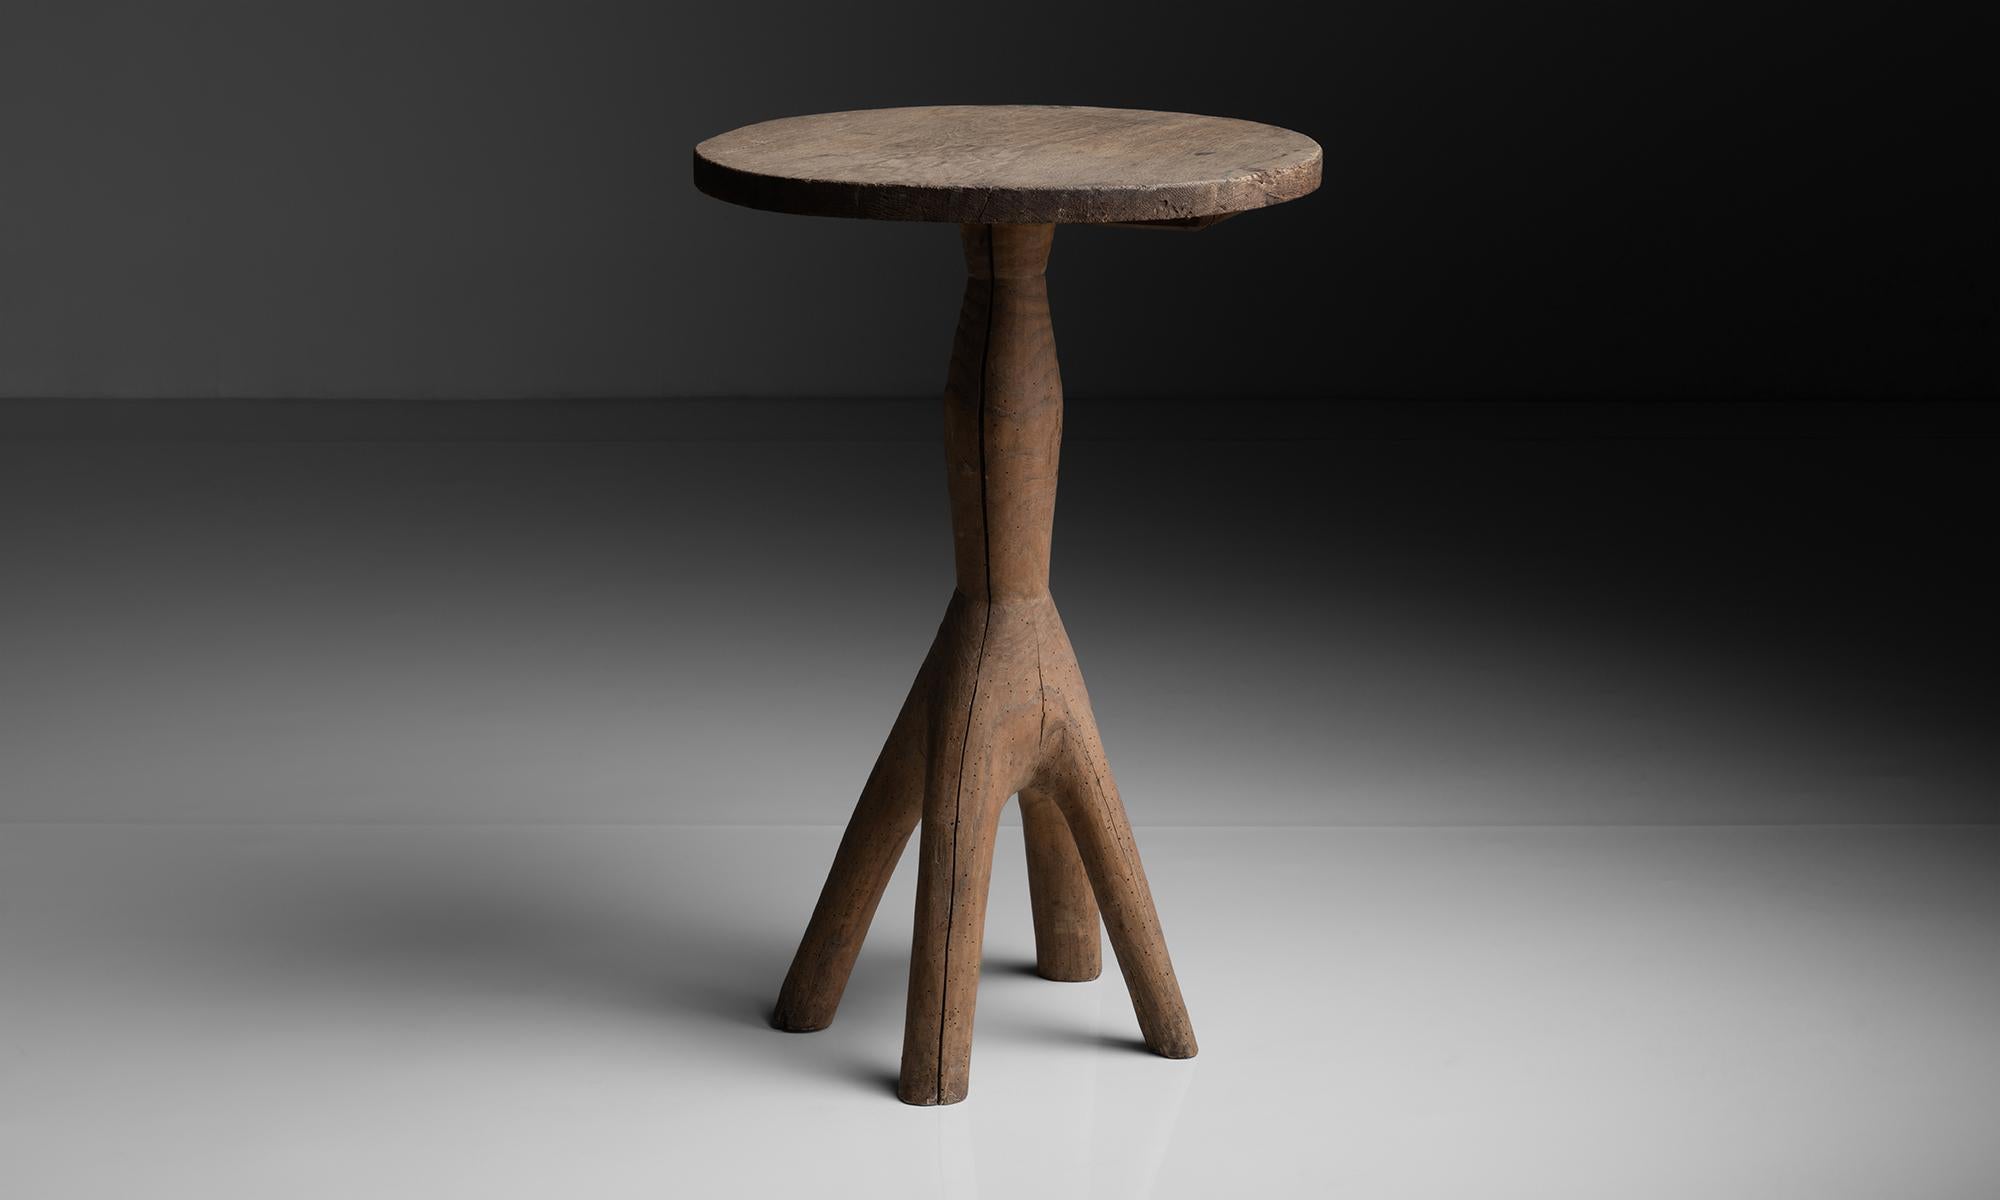 Sculptural Side Table

France circa 1900

Circular top, with base carved from a singe piece of wood.

Measures 20.5”dia x 31”h